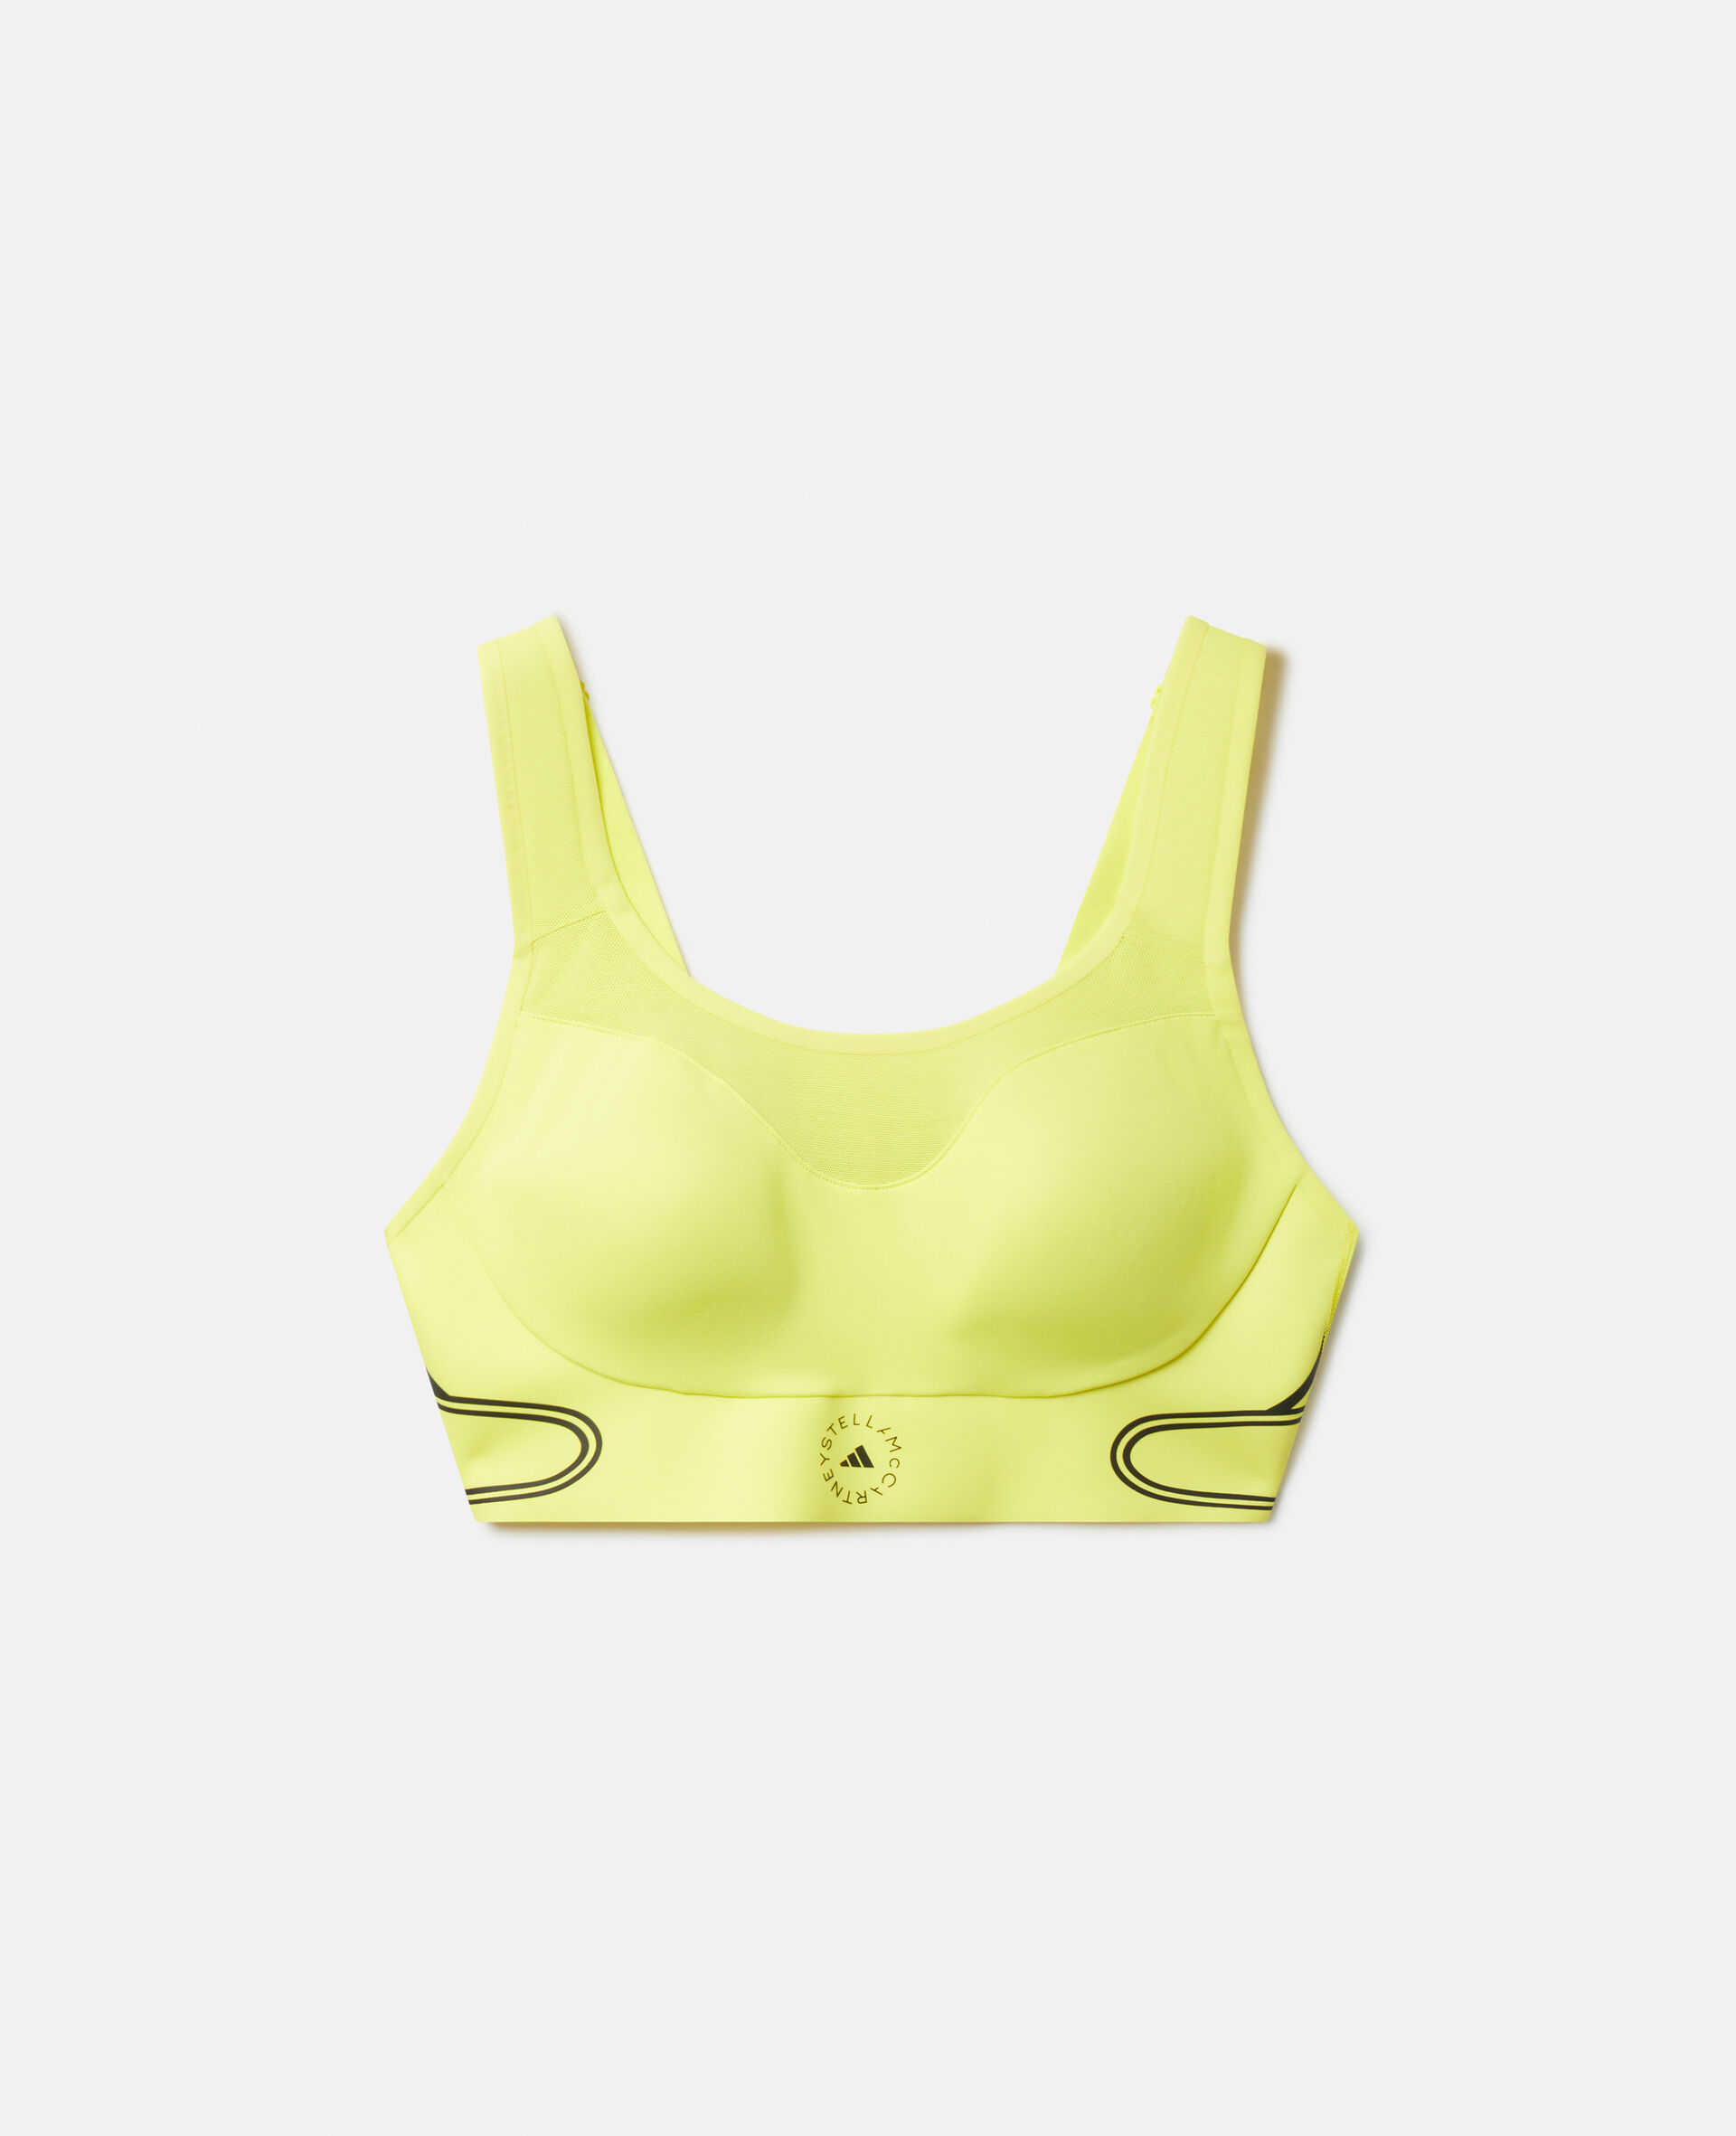 TruePace High Support Sports Bra-Yellow-large image number 0